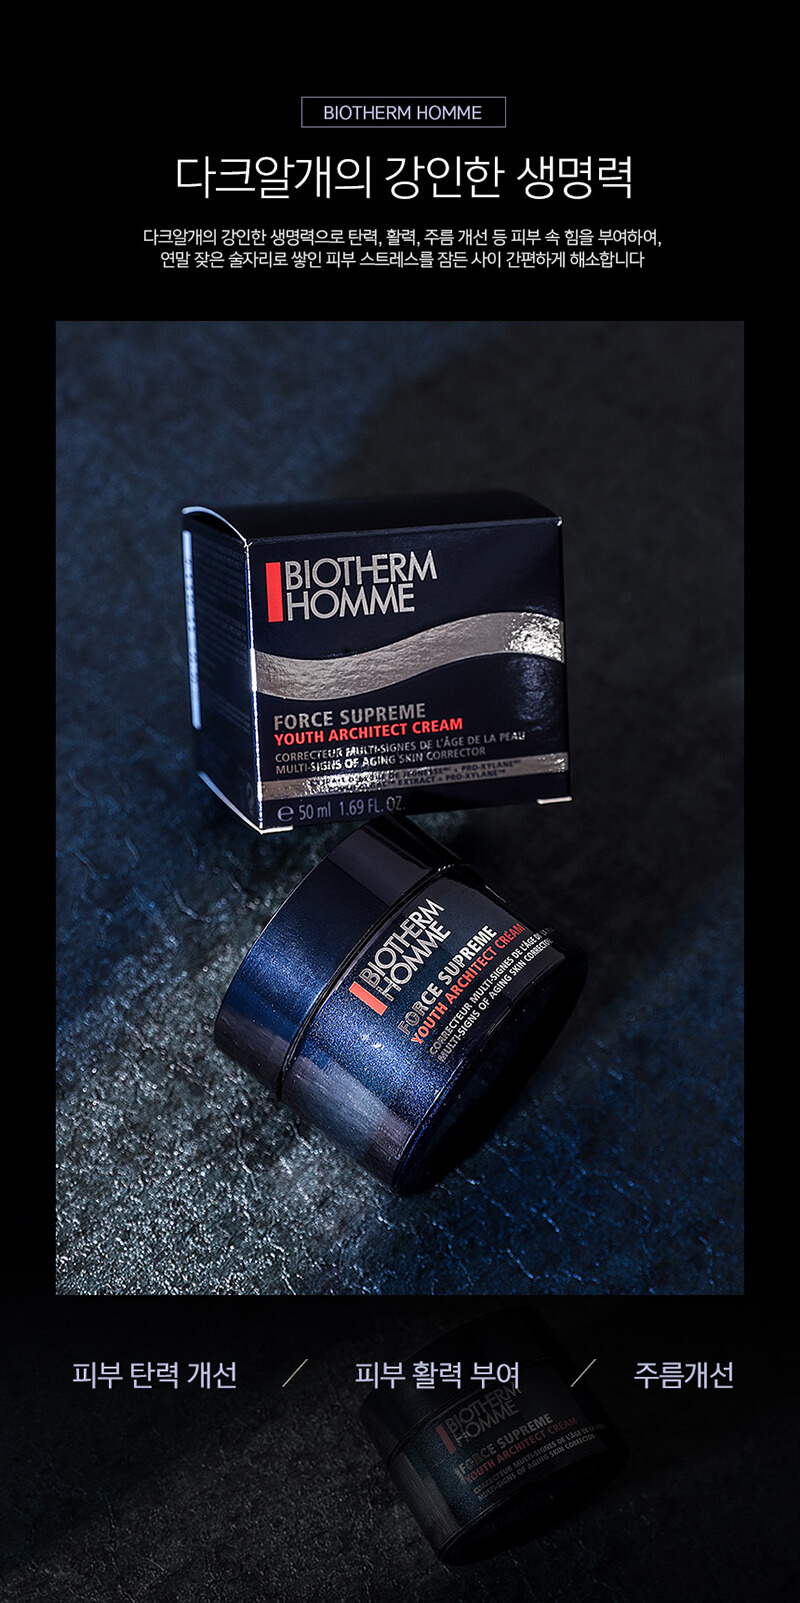 BIOTHERM, BIOTHERM Homme Force Supreme Youth Architect Cream, BIOTHERM Homme Force Supreme Youth Architect Cream รีวิว, BIOTHERM Homme Force Supreme Youth Architect Cream ราคา, BIOTHERM Homme Force Supreme Youth Architect Cream 20 ml., Homme Force Supreme Youth Architect Cream